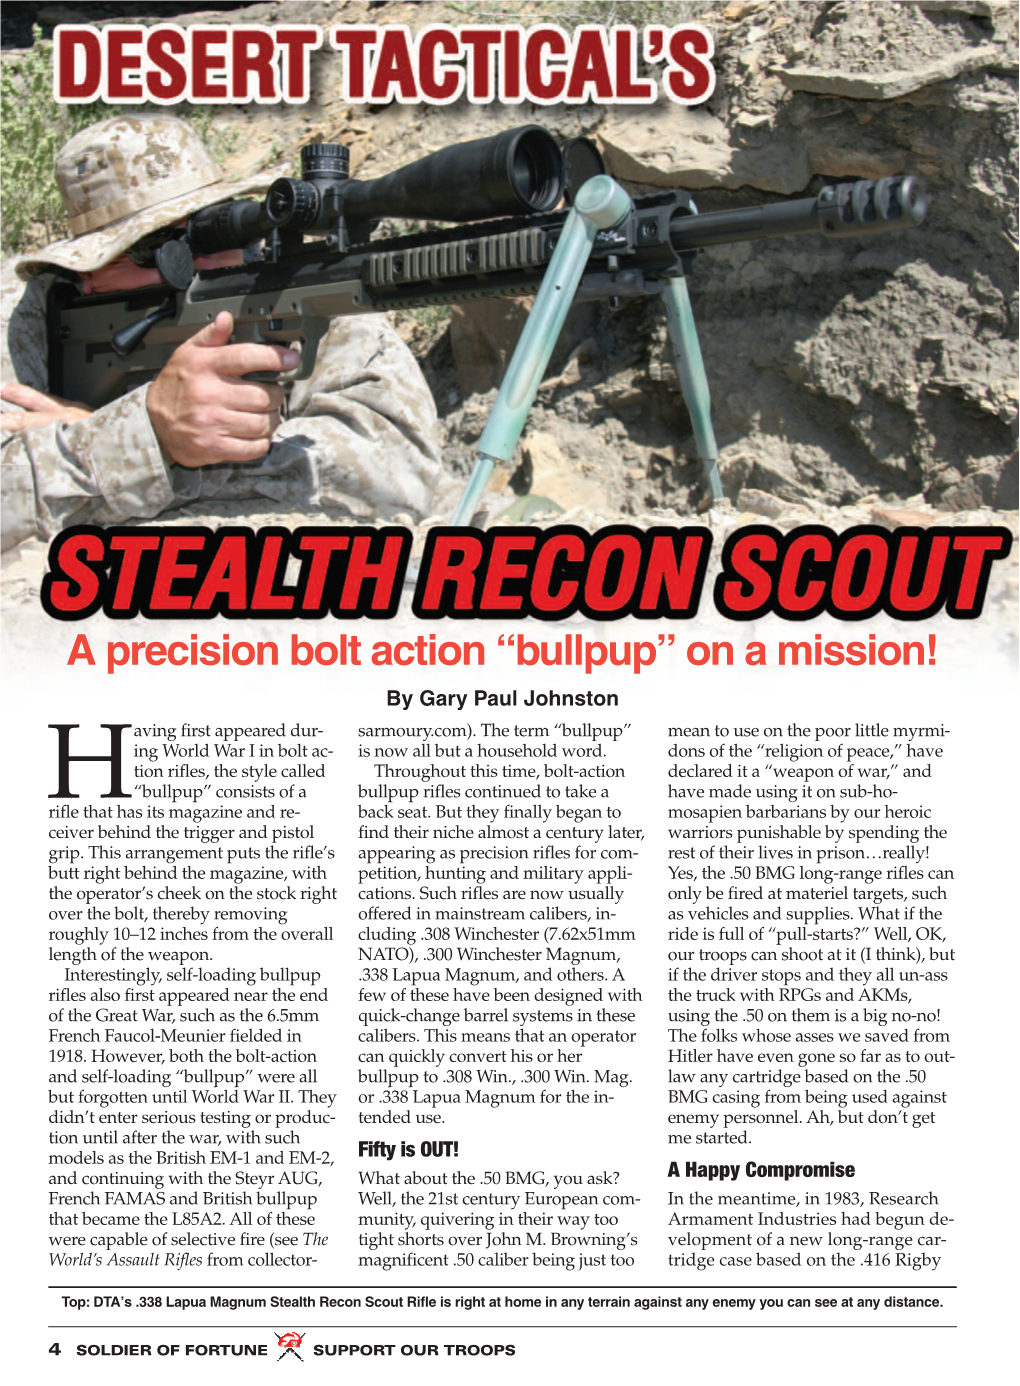 Desert Tactical's Stealth Recon Scout